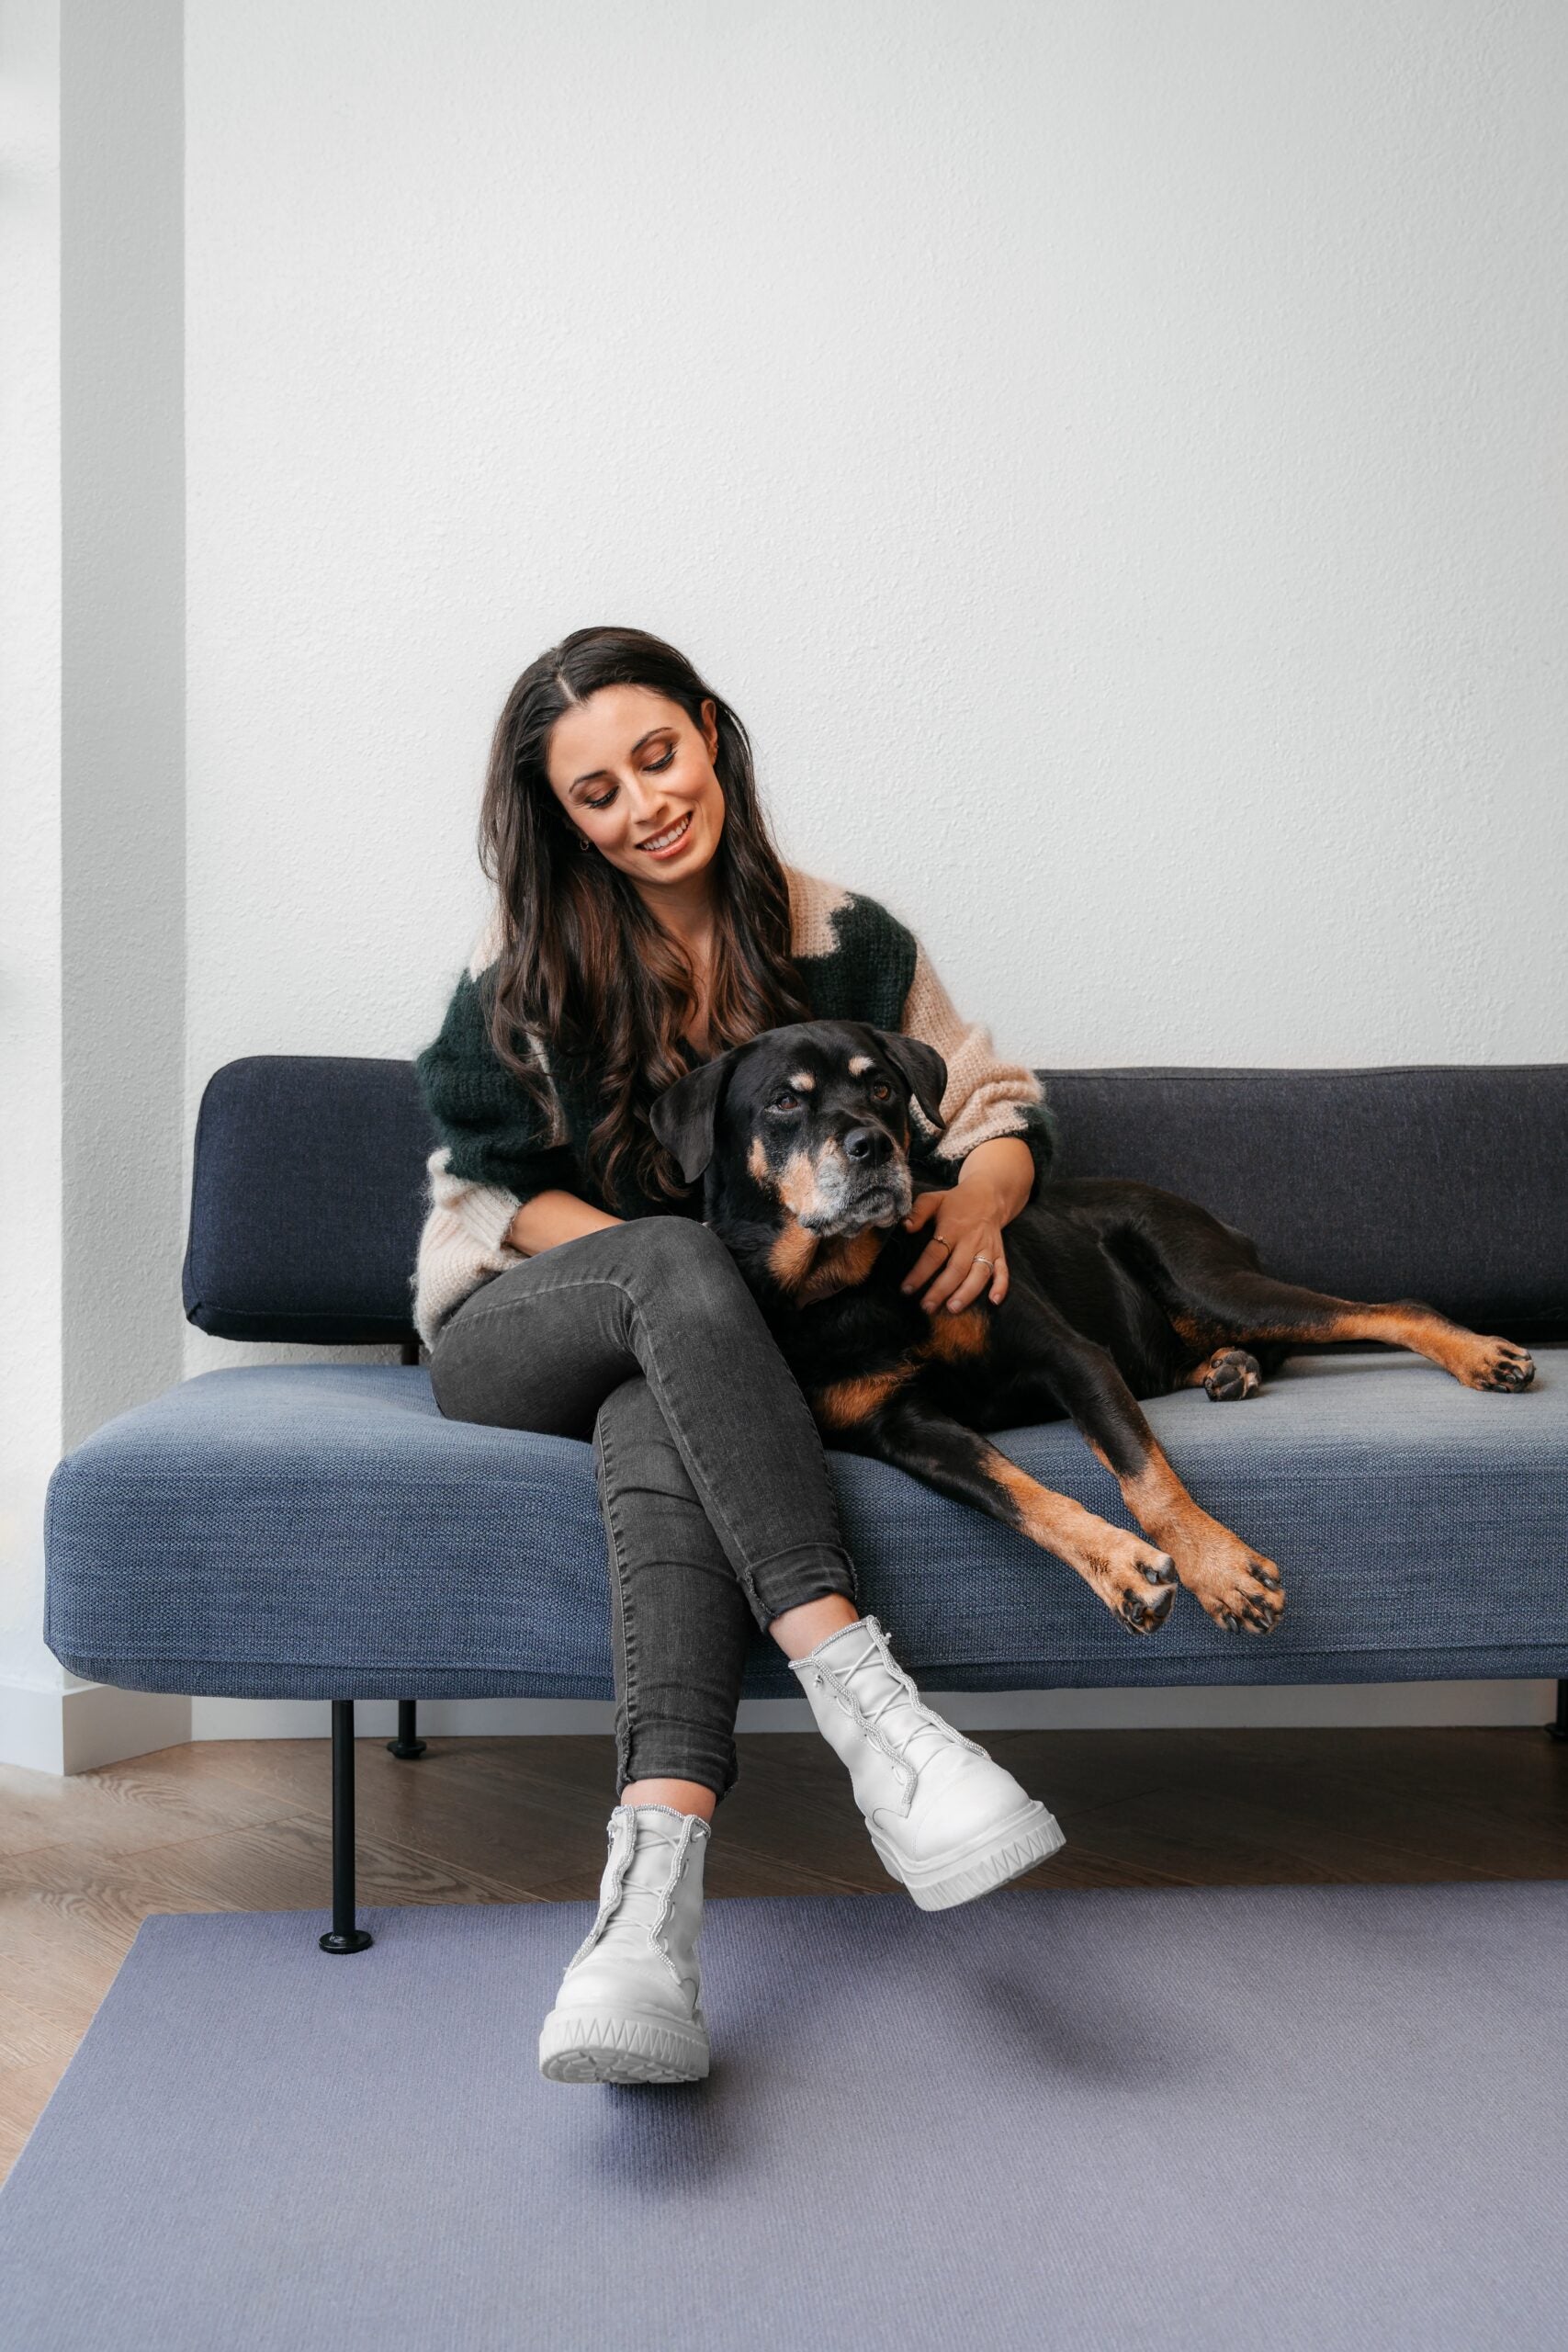 Celine Halioua, the founder and chief executive of the biotech company Loyal, with her aging Rottweiler Della.